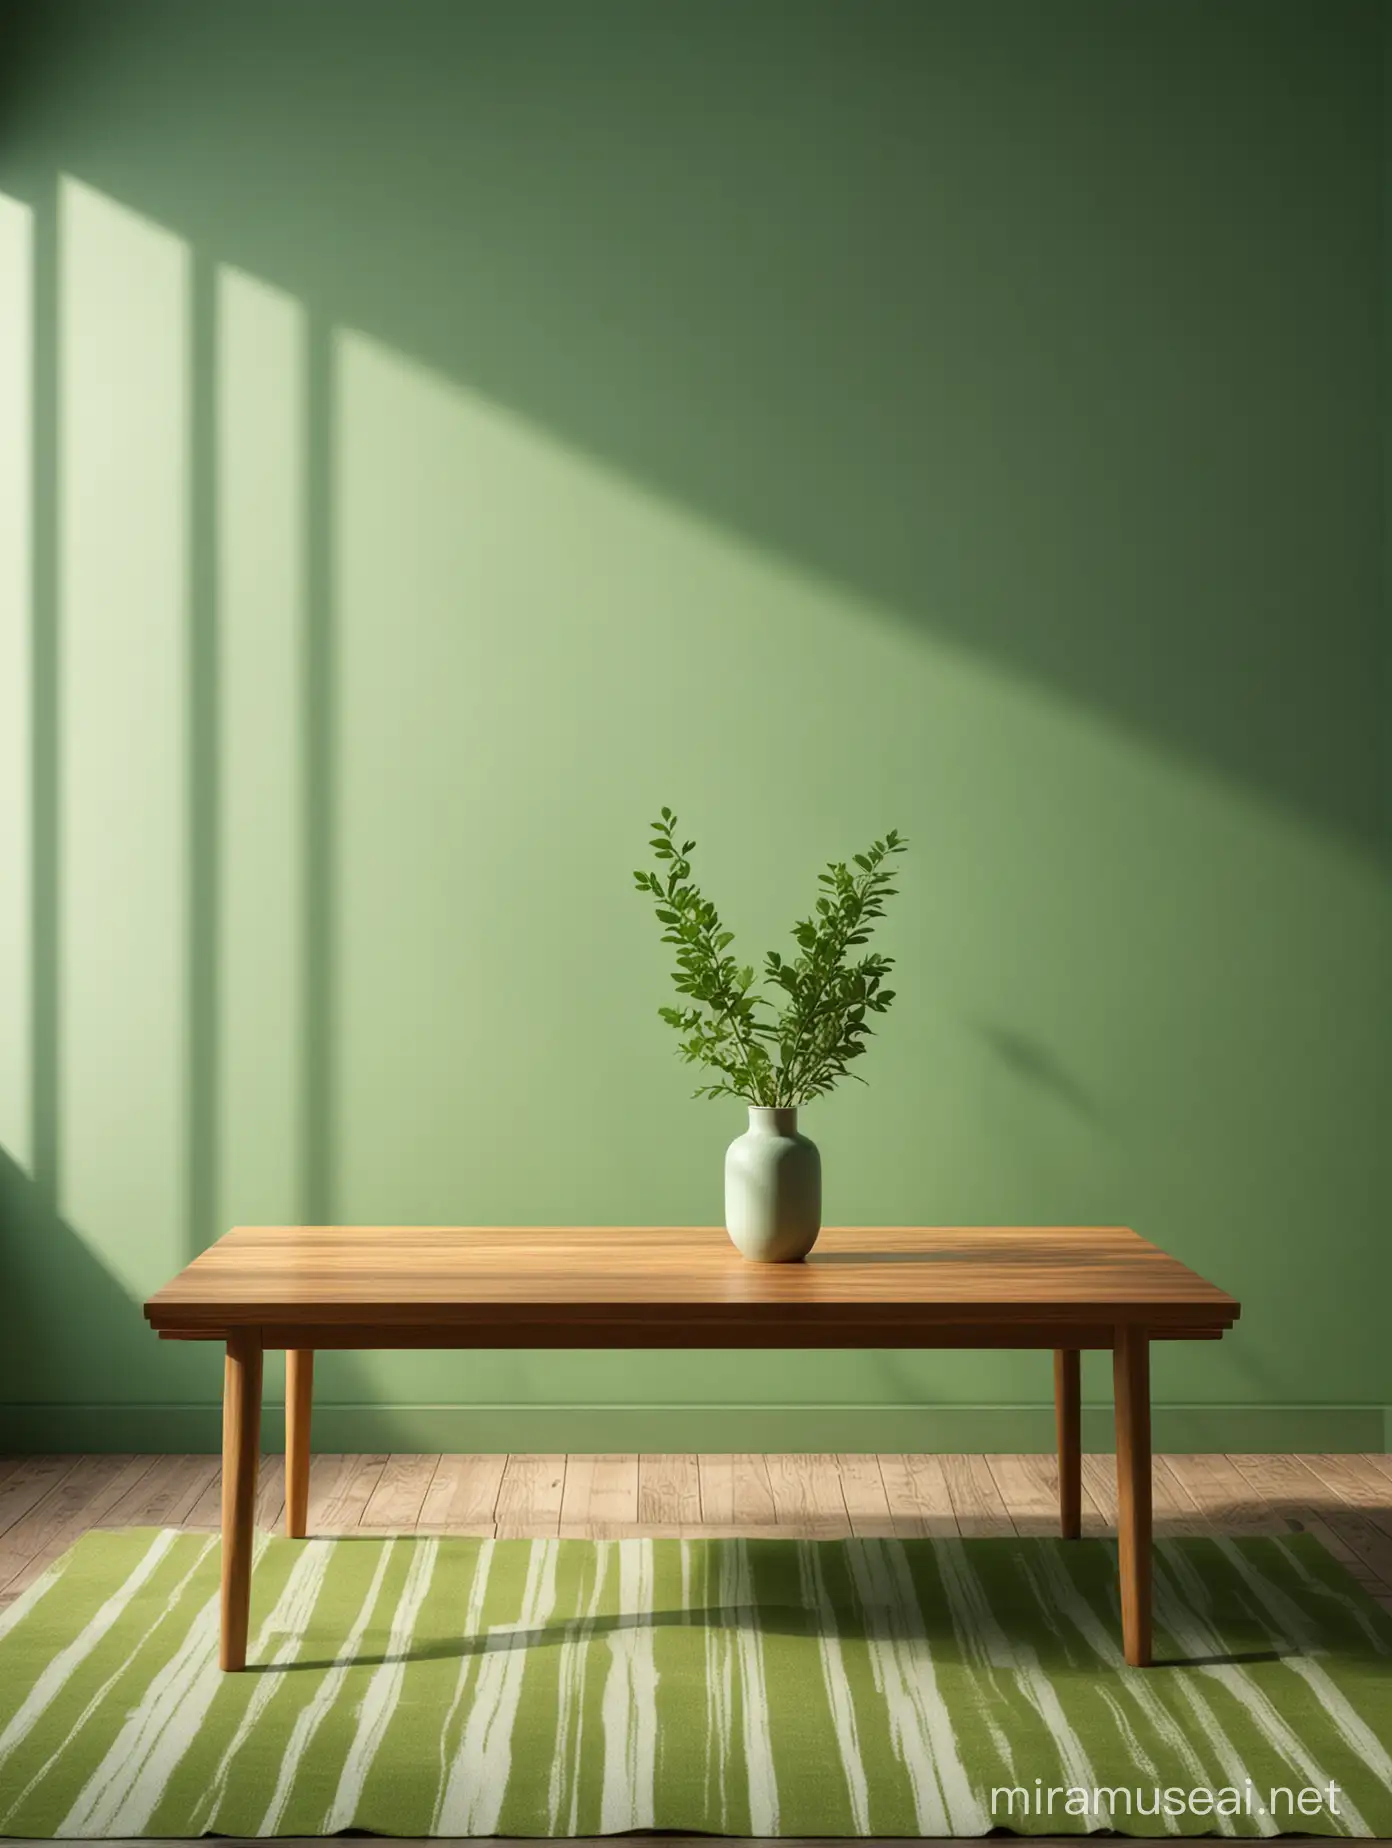 wooden table on a green cloth background, in the style of minimalist stage designs, windows vista, organic minimalism, uhd image, striped arrangements, sunrays shine upon it, contest winner